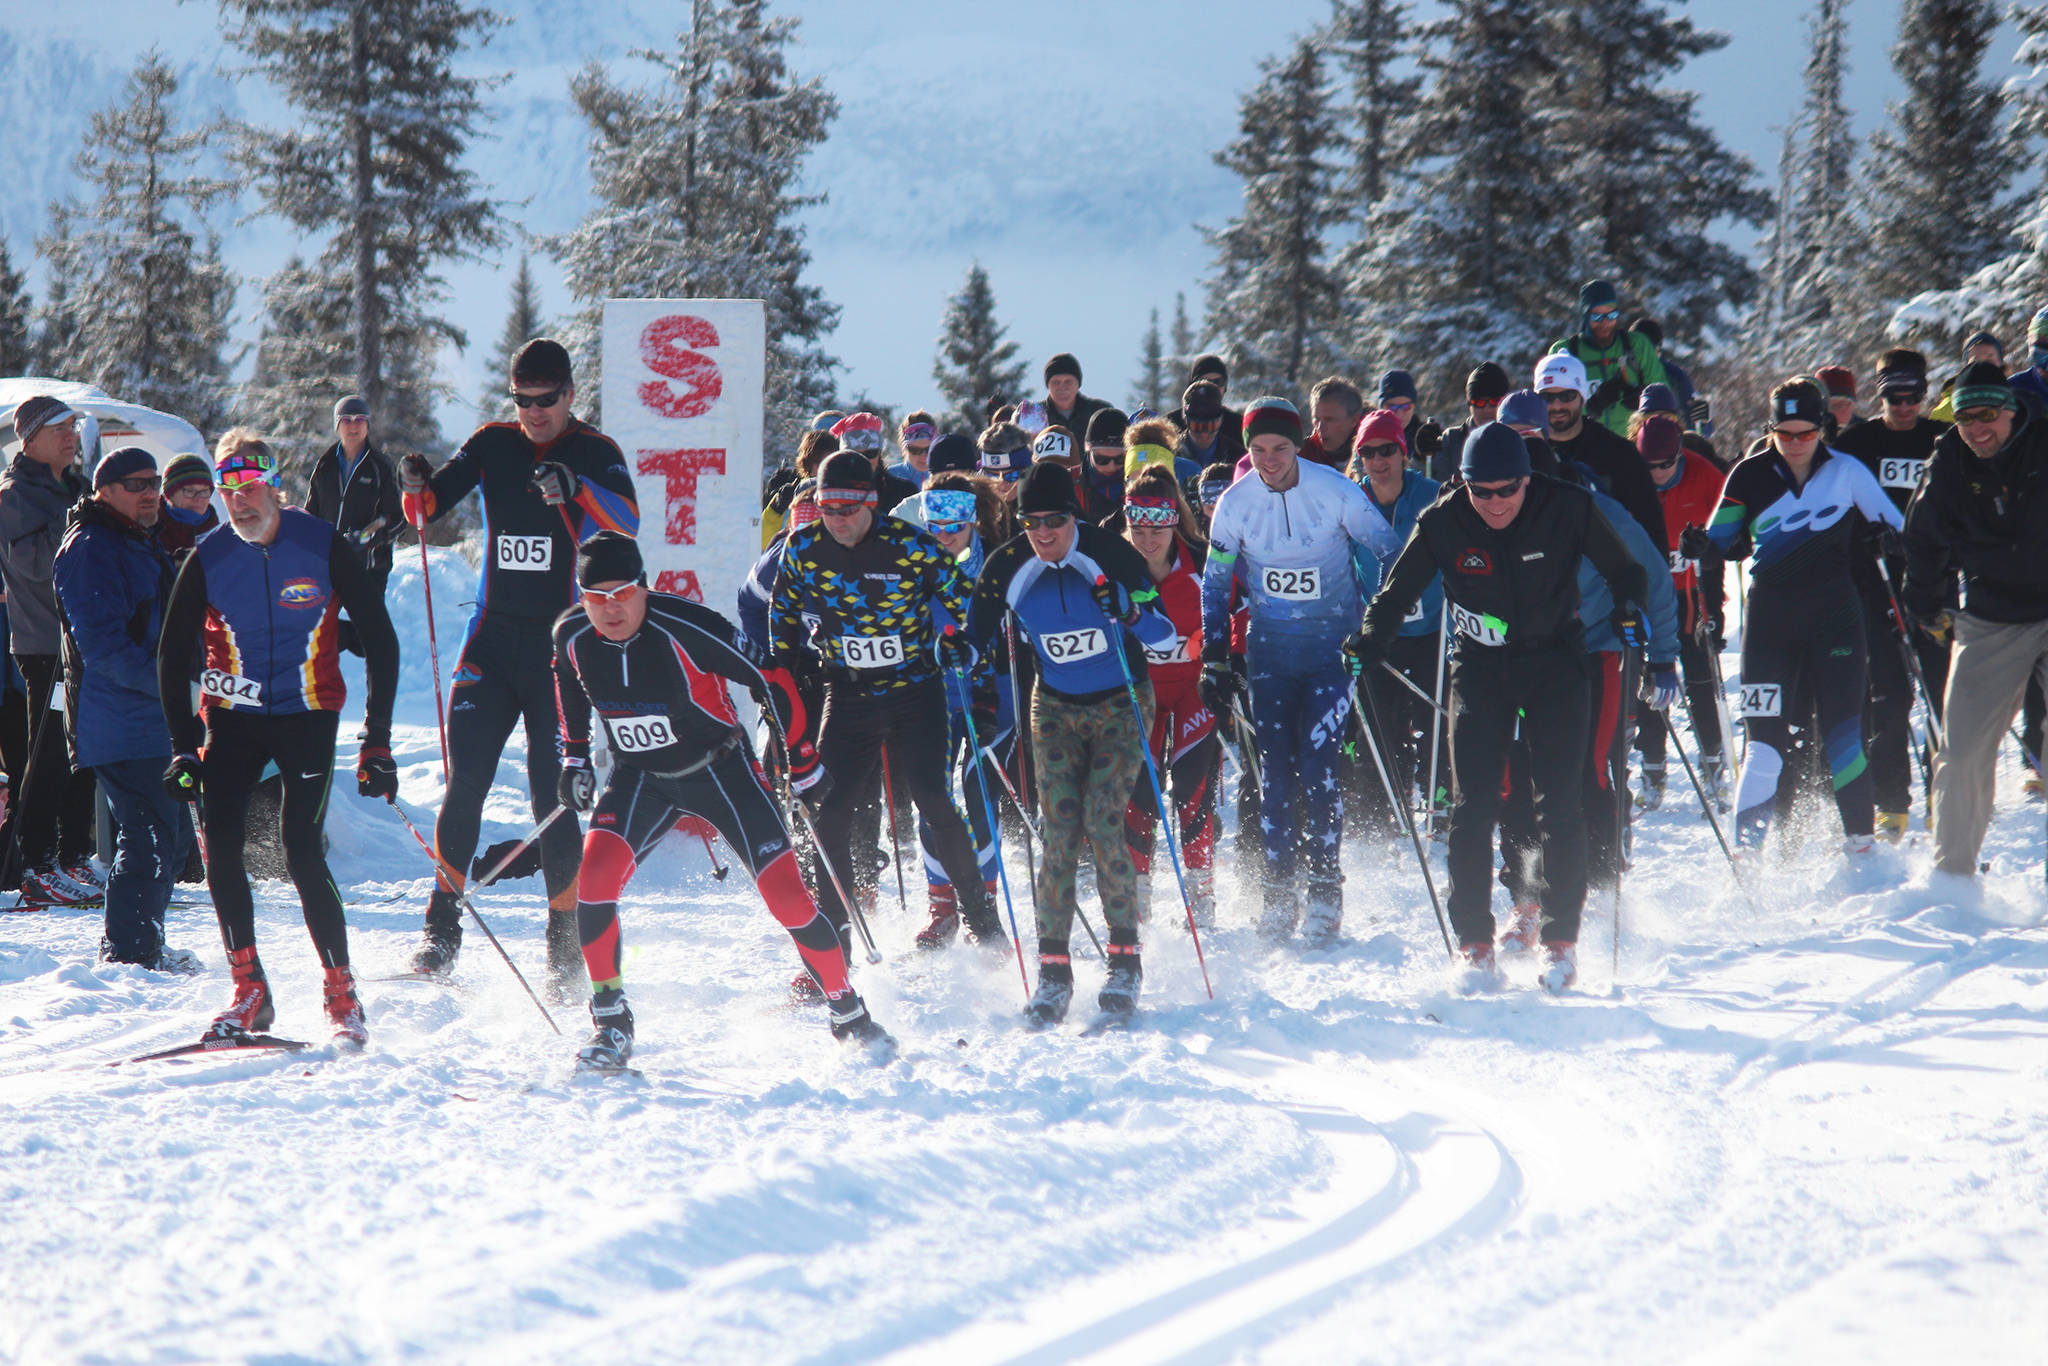 Skiers participating in the 42 Kilometer race take off from the starting line in this year’s Kachemak Bay Nordic Ski Marathon on Saturday, March 10, 2018 at the McNeil Canyon Ski Area outside of Homer, Alaska. (Photo by Megan Pacer/Homer News)